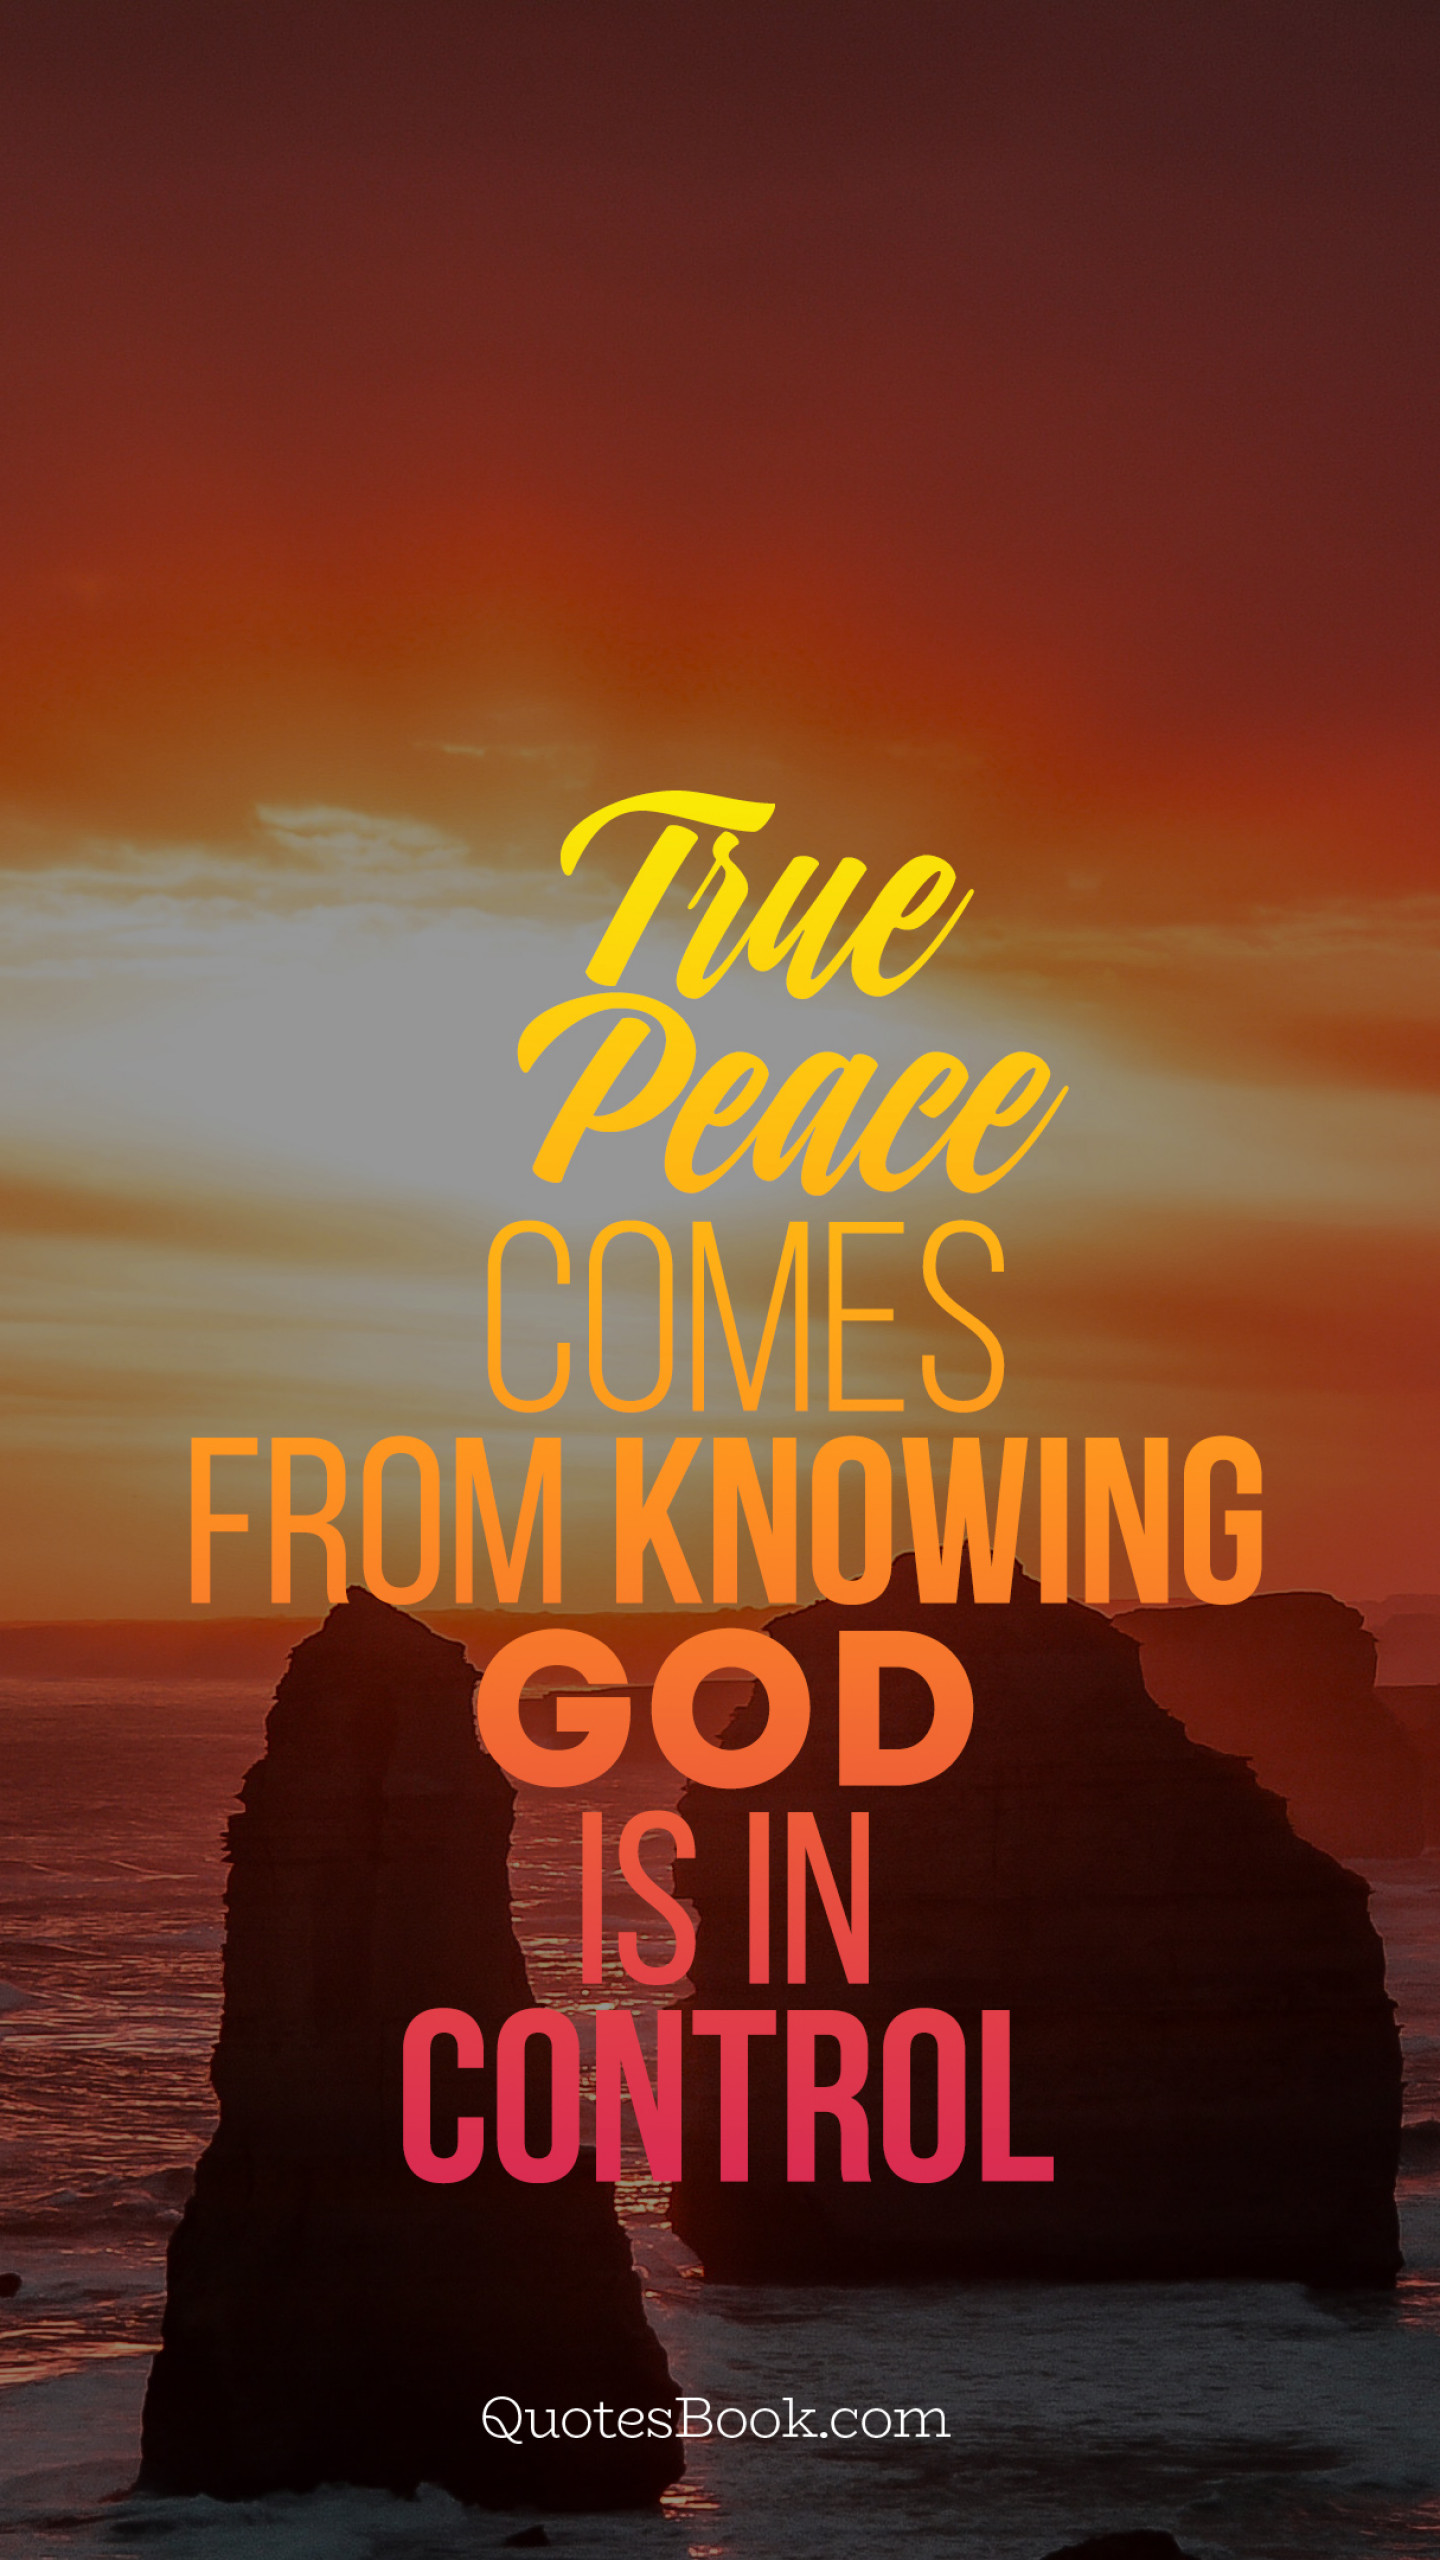 True peace comes from knowing God is in control QuotesBook